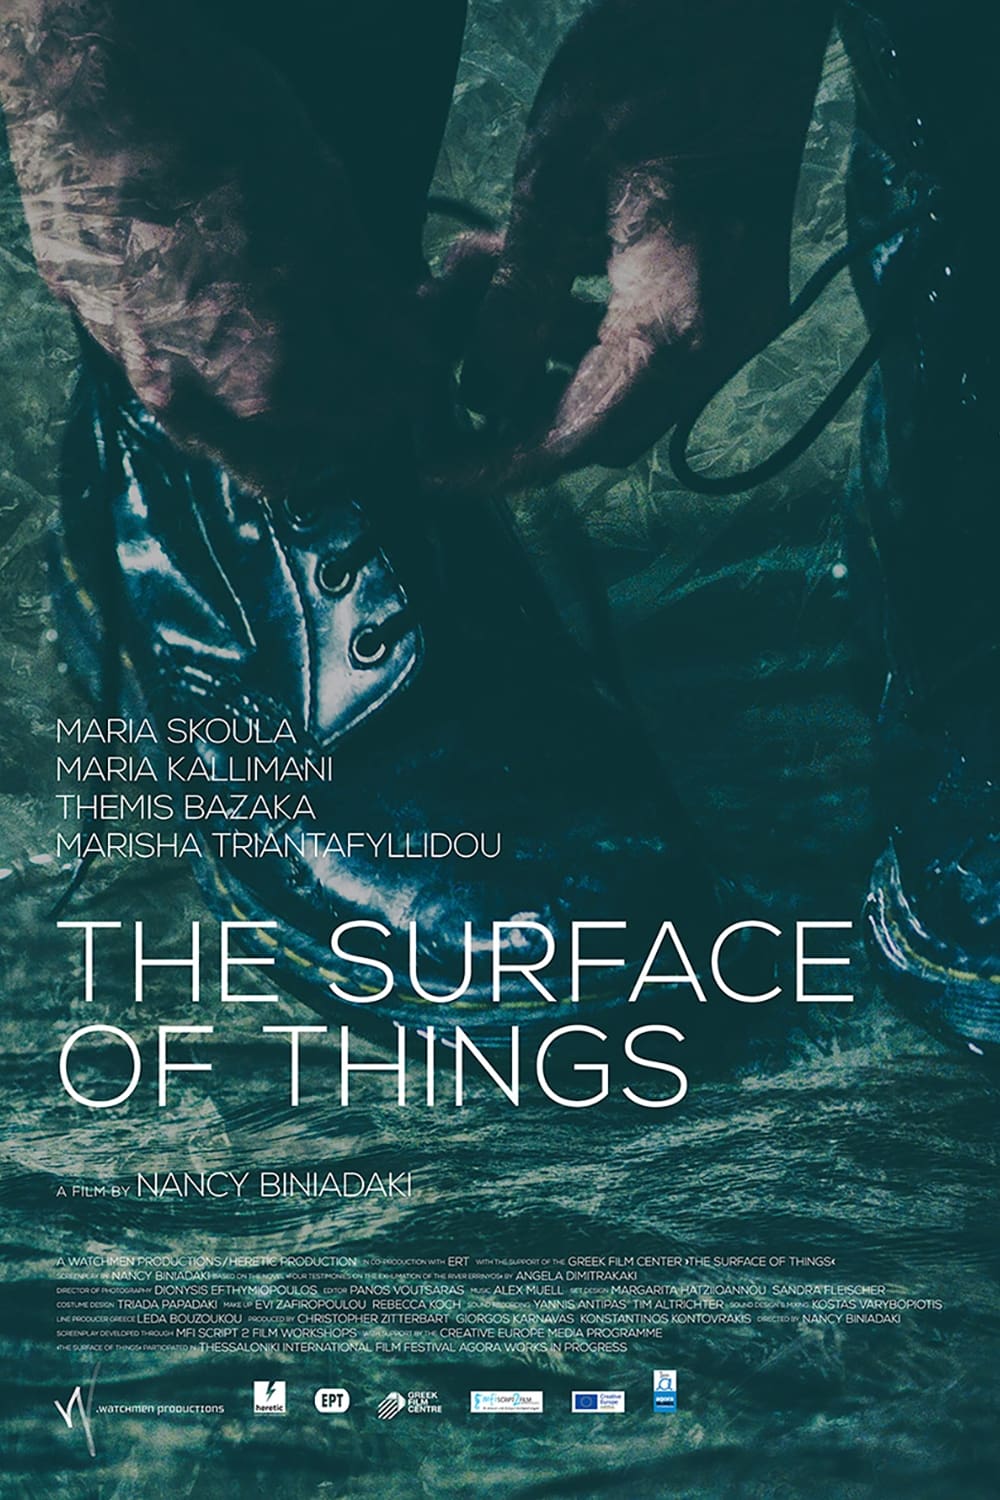 The Surface of Things